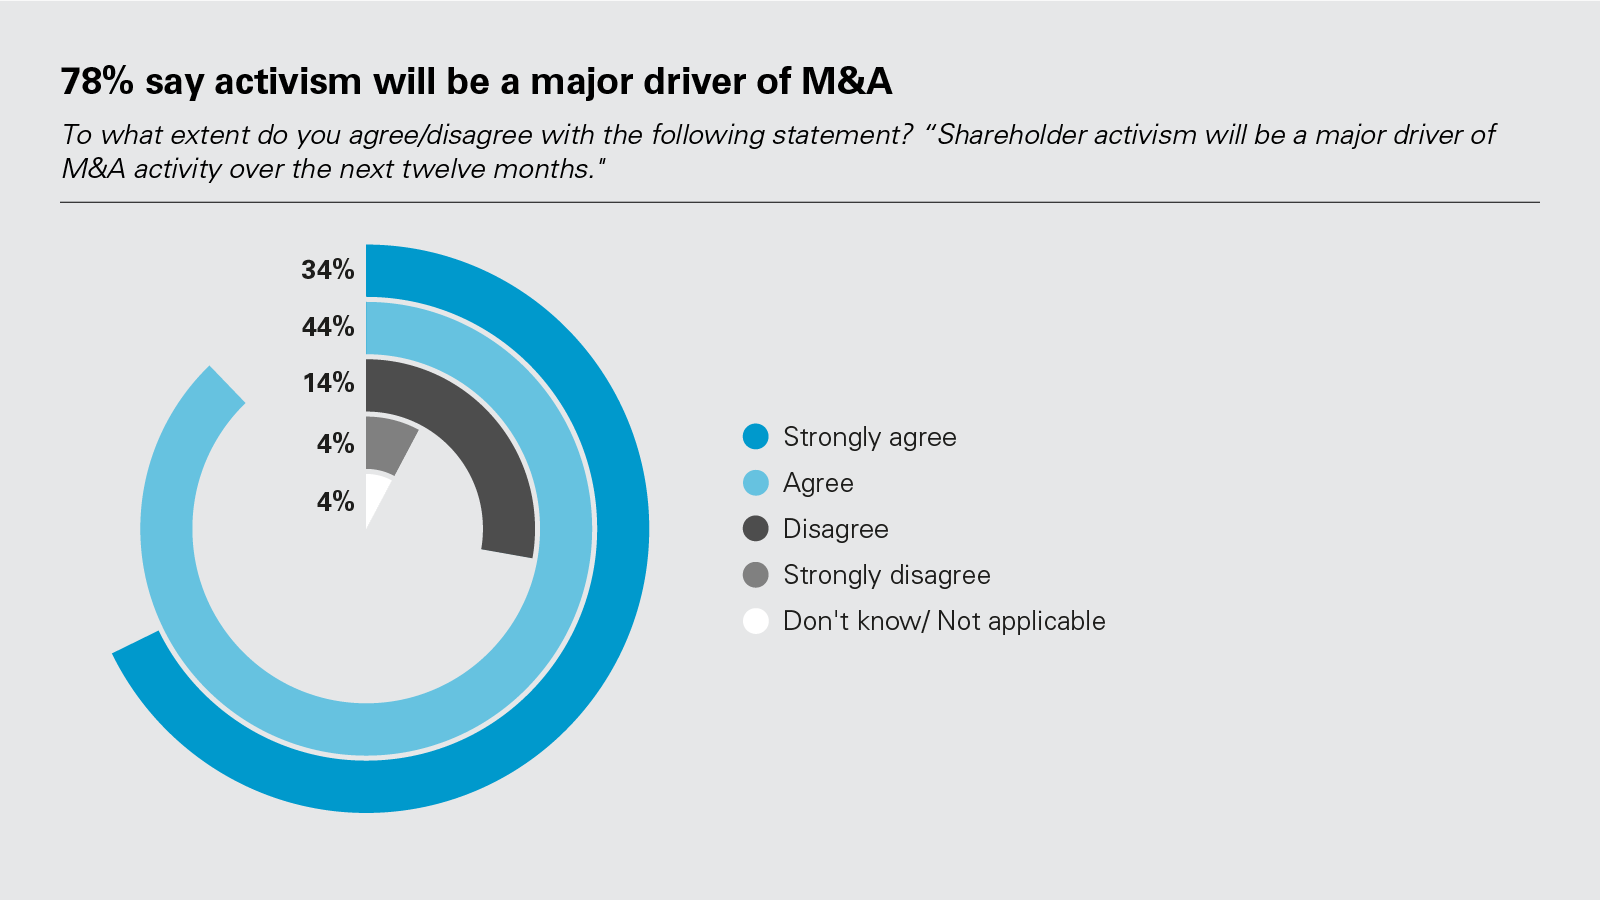 78% say activism will be a major driver of M&A